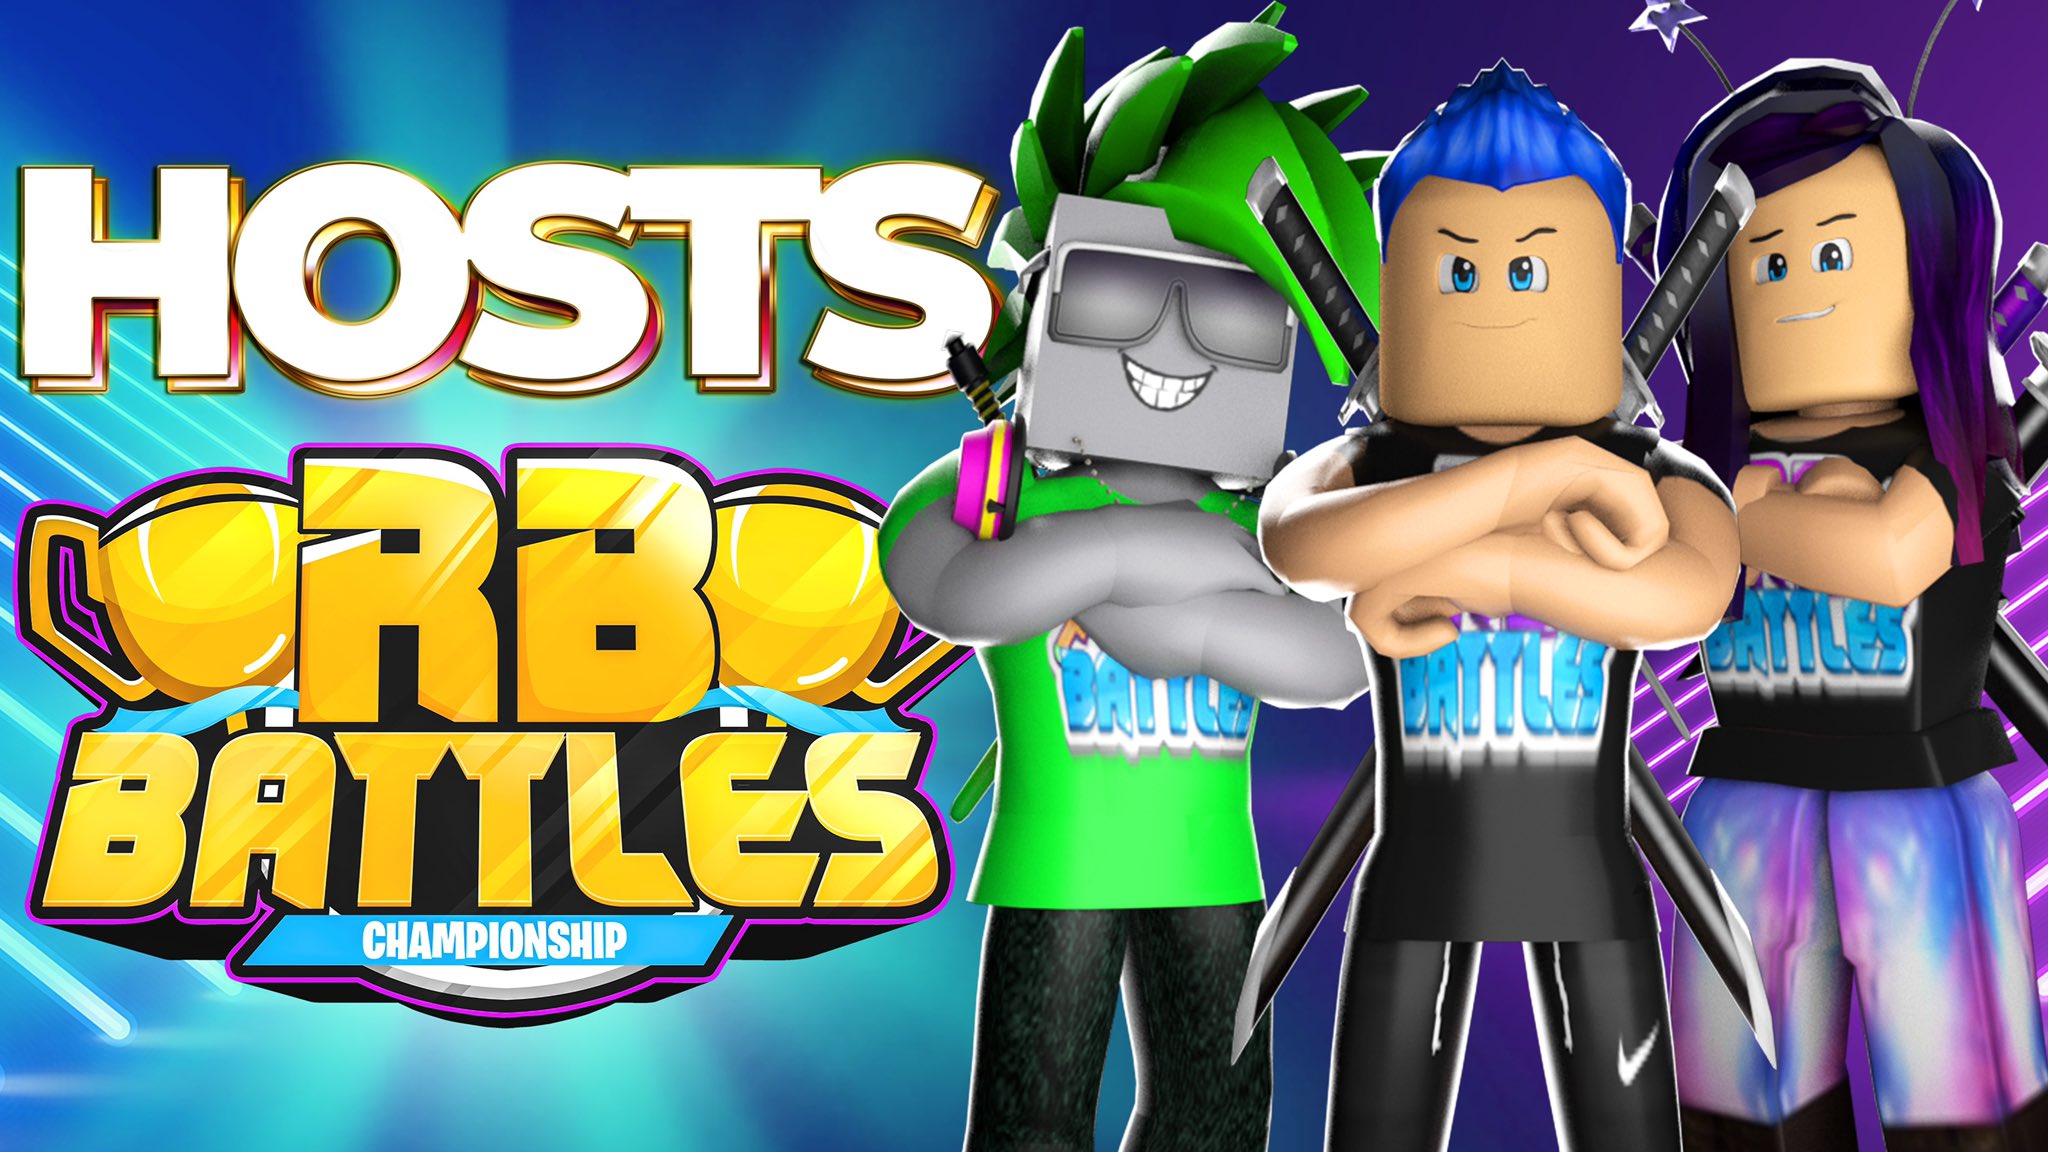 Roblox Battles On Twitter Introducing Your Hosts Djmonopoli Russotalks Sabrinabrite The Action Begins Tomorrow Make Sure You Re Subscribed To The Rb Battles Youtube Channel To See - roblox battles on twitter here comes the next rb battles